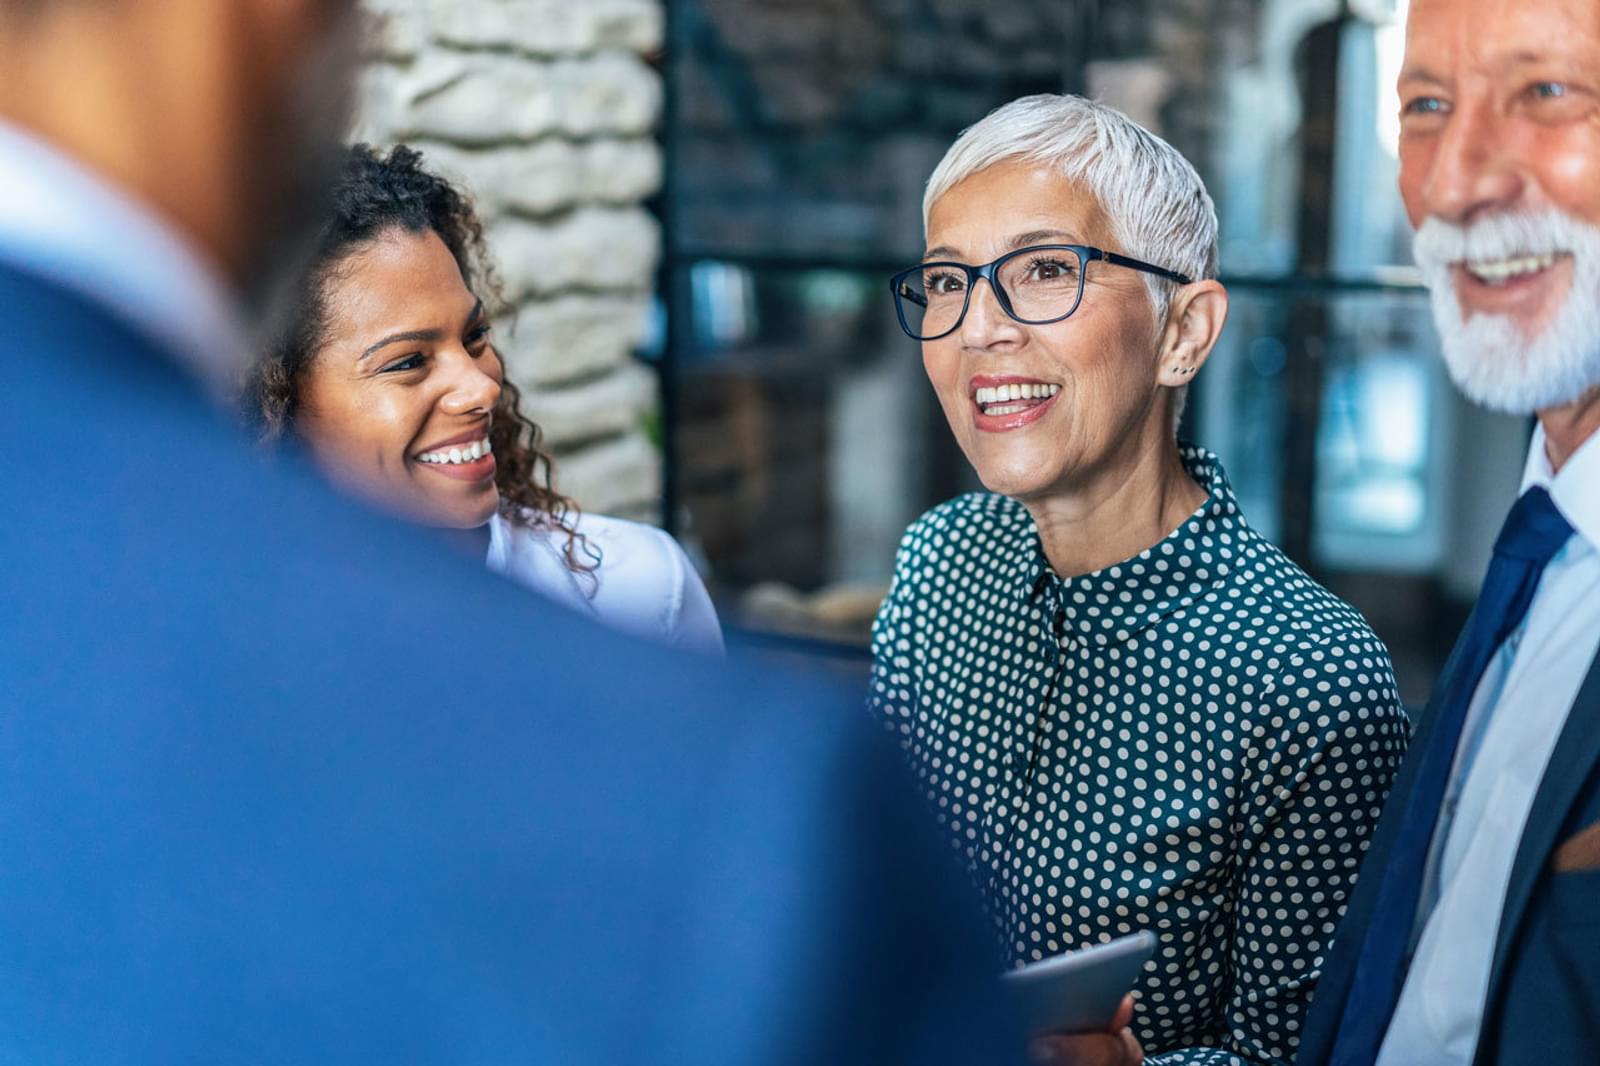 Mature woman in glasses smiles at colleagues during business discussion